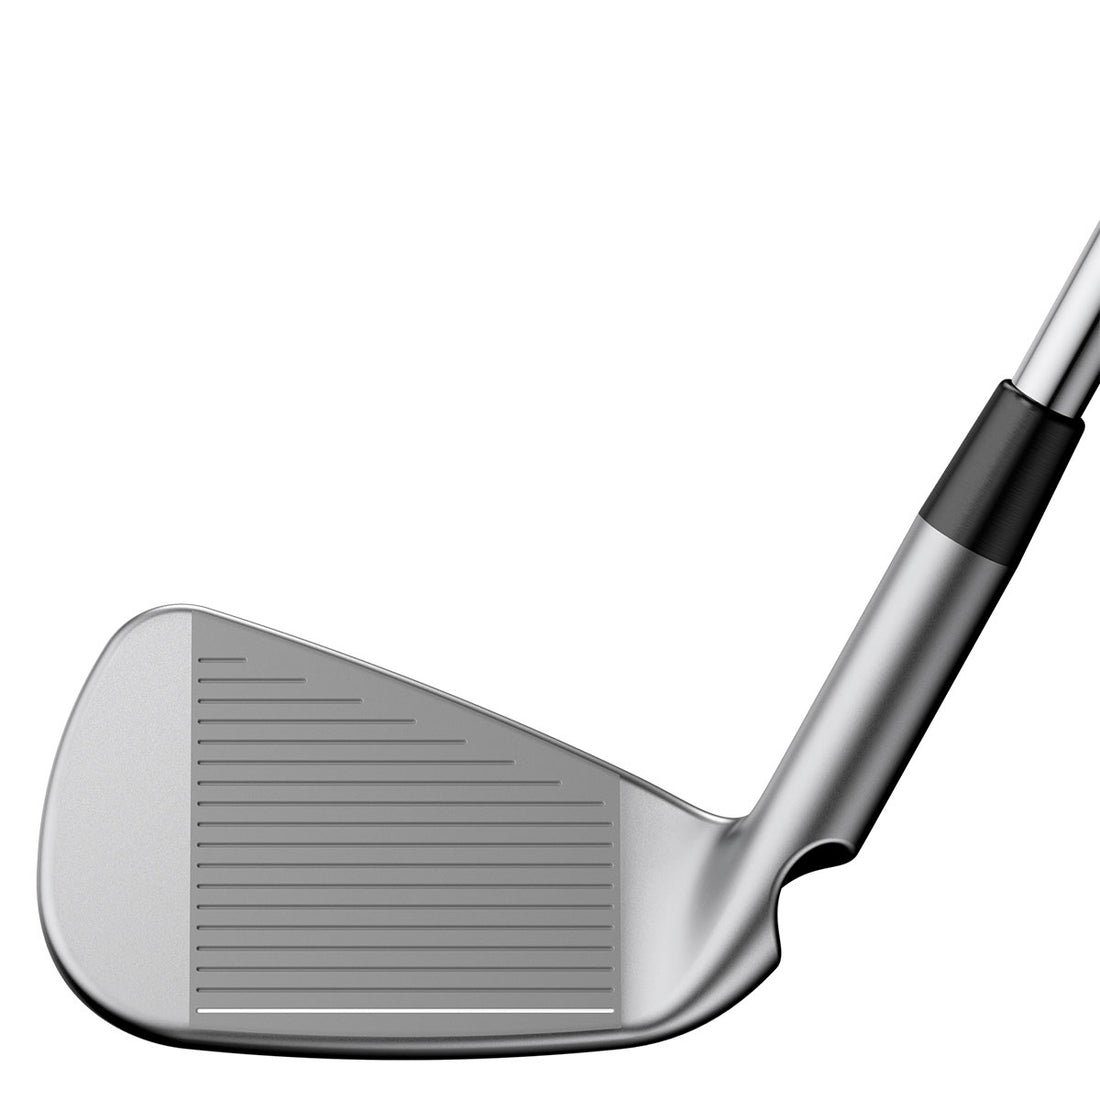 PING i525 IRONS